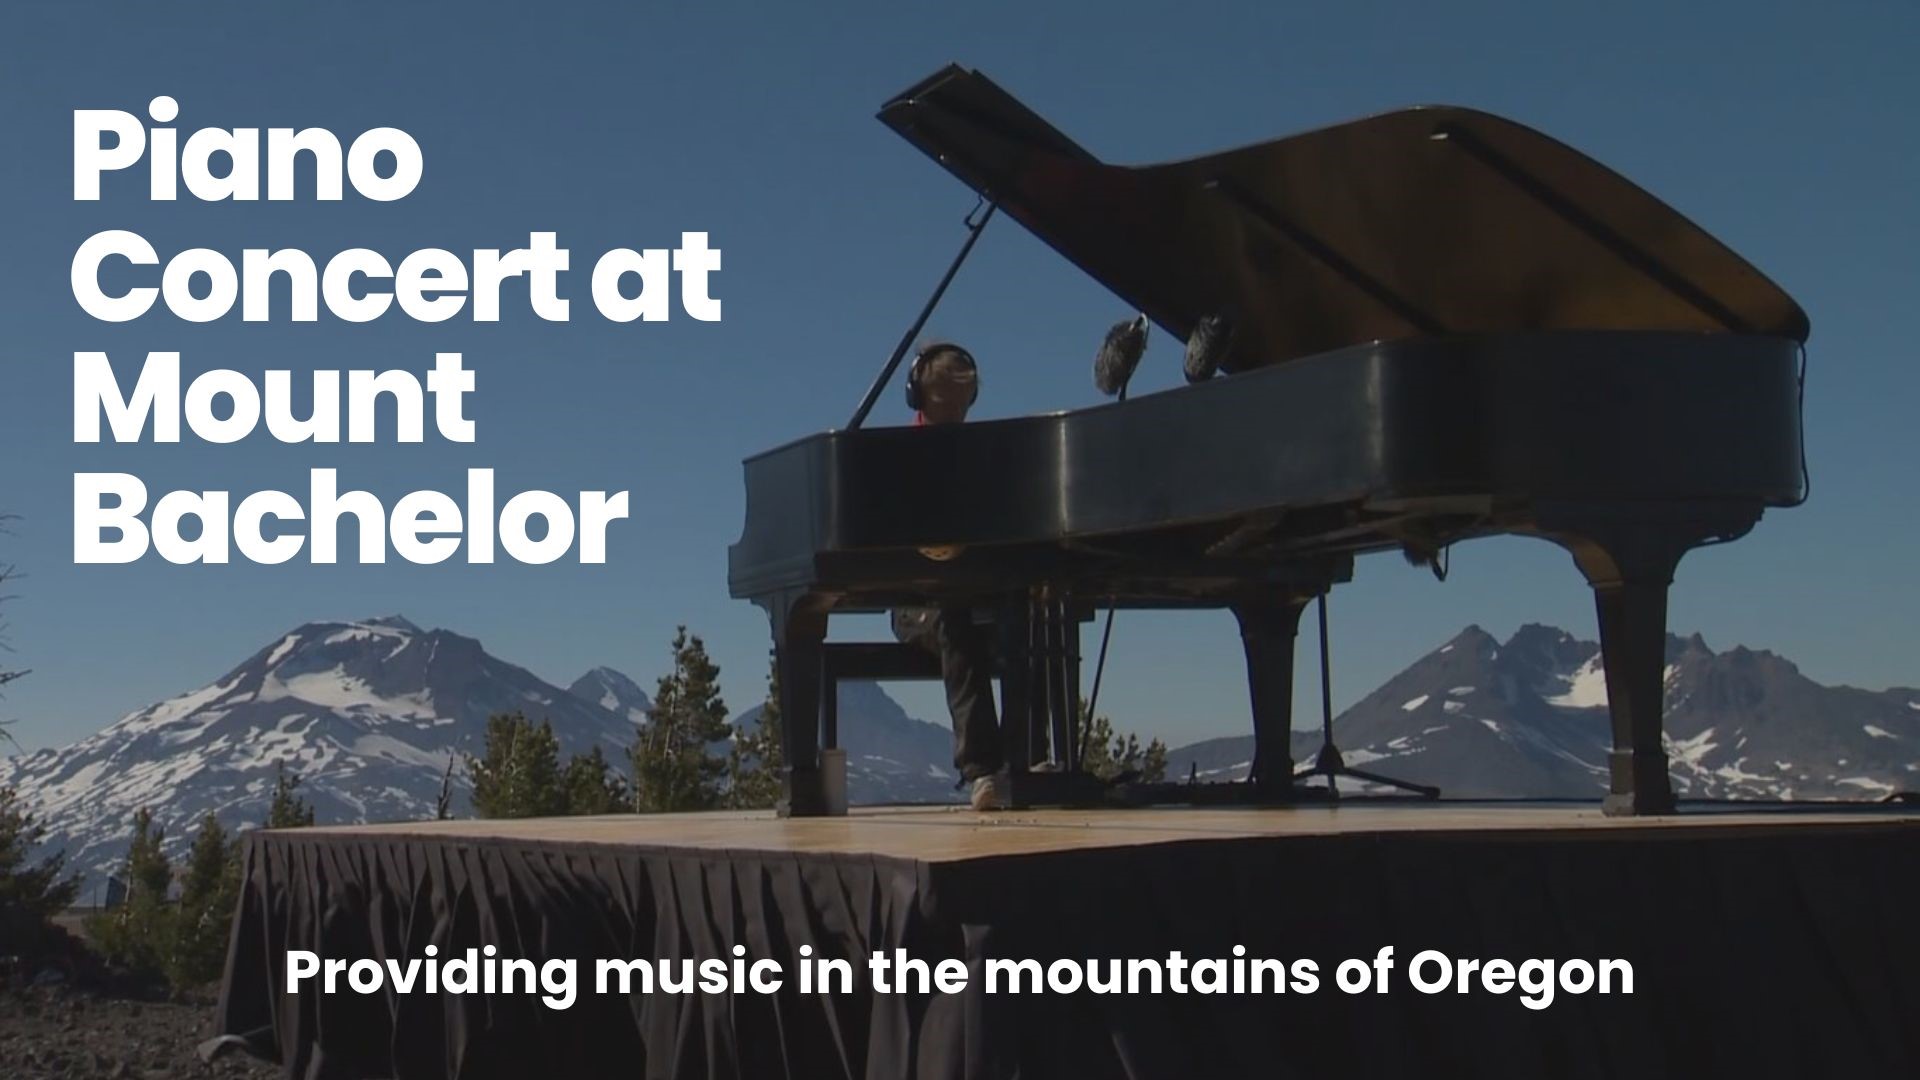 An Oregon musician hauls his grand piano to the state's treasured outdoor spaces, playing classical concerts with stunning backdrops.